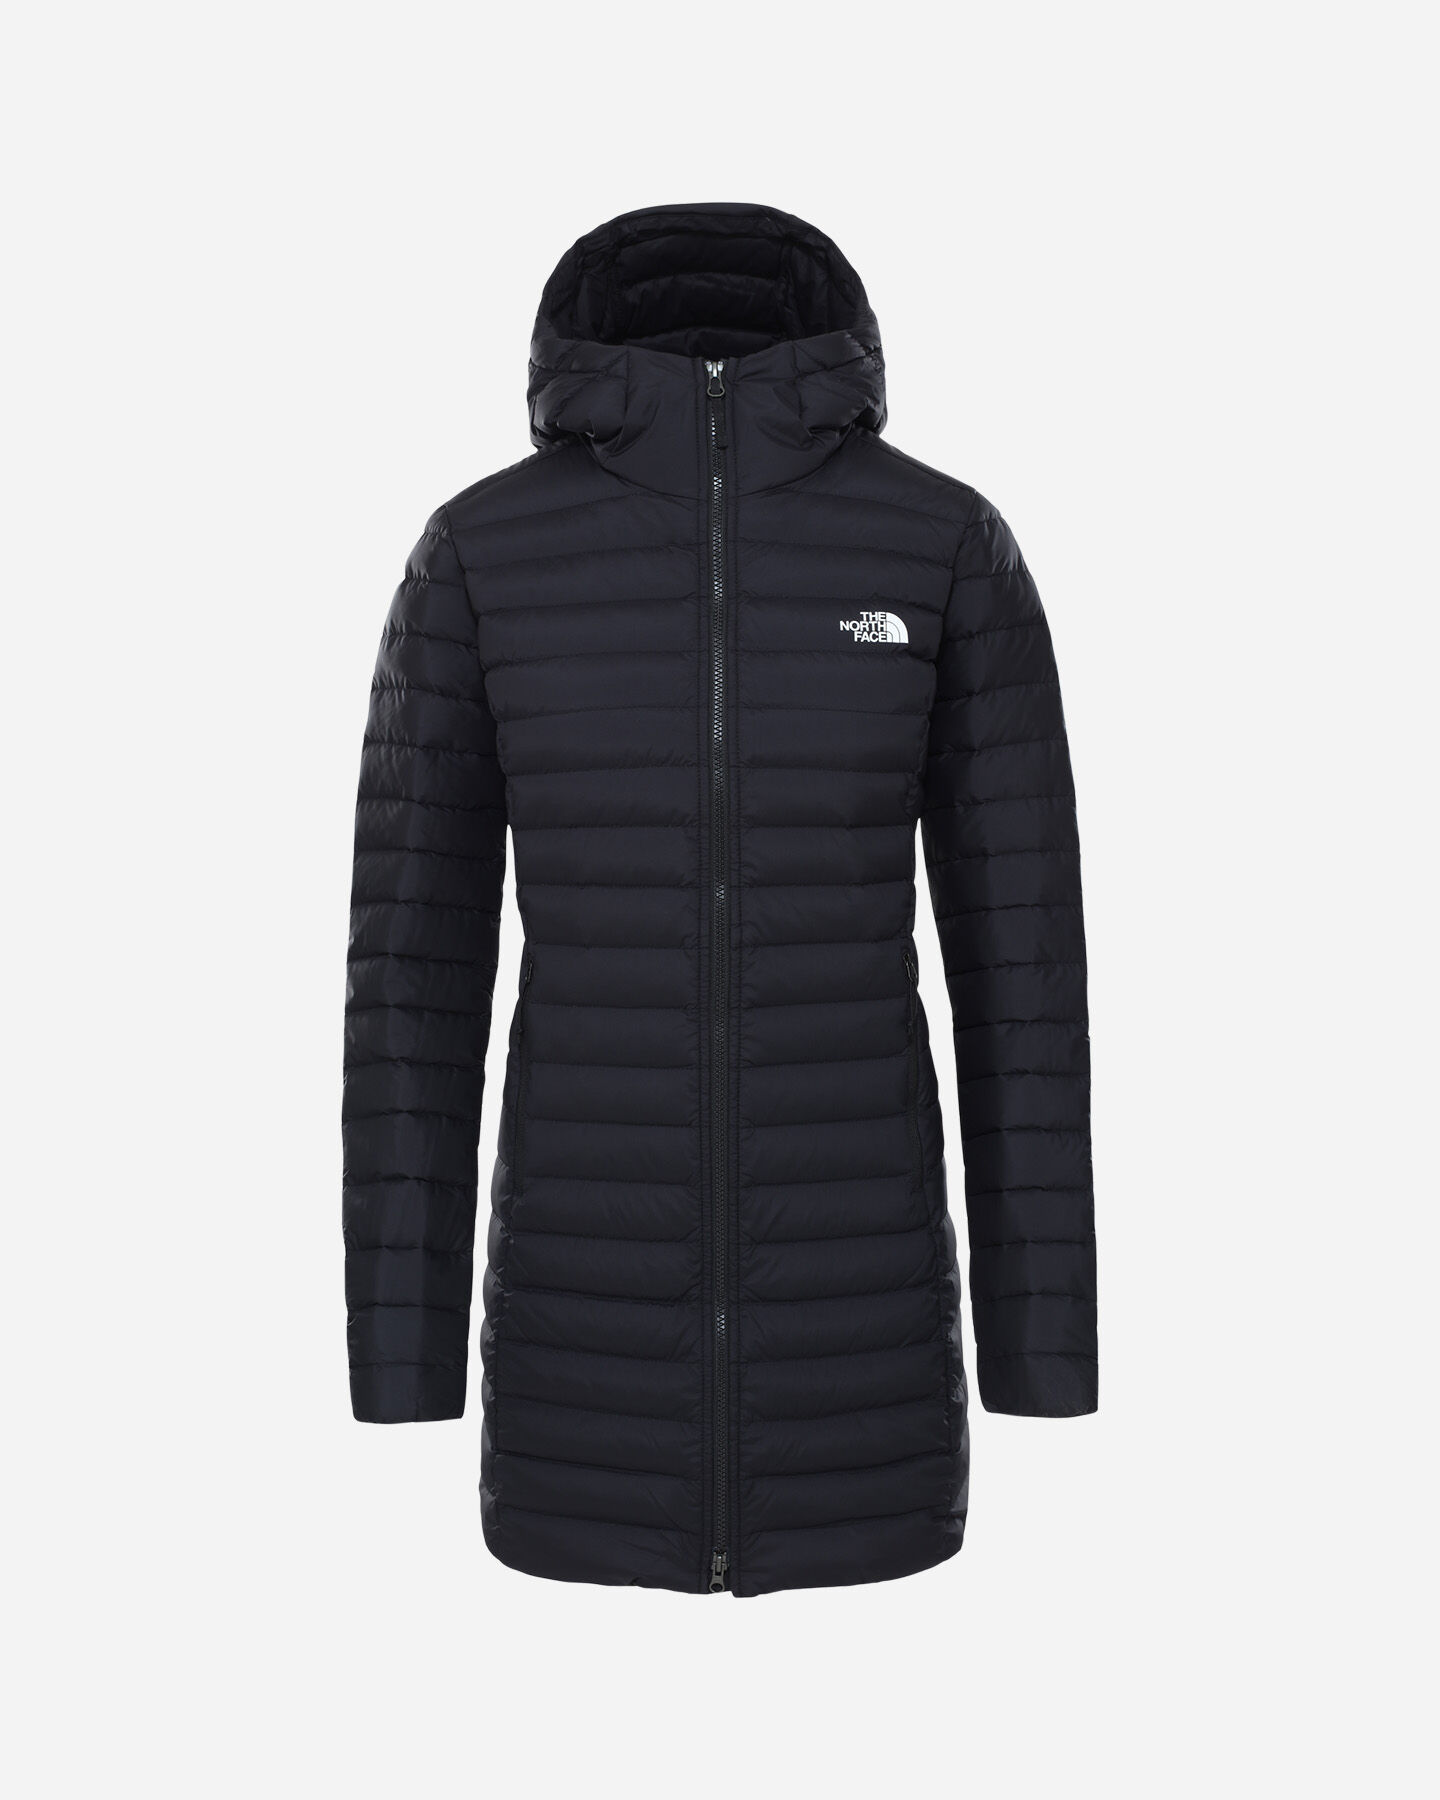  Giacca THE NORTH FACE STRETCH DOWN W S5243064|JK3|S scatto 0